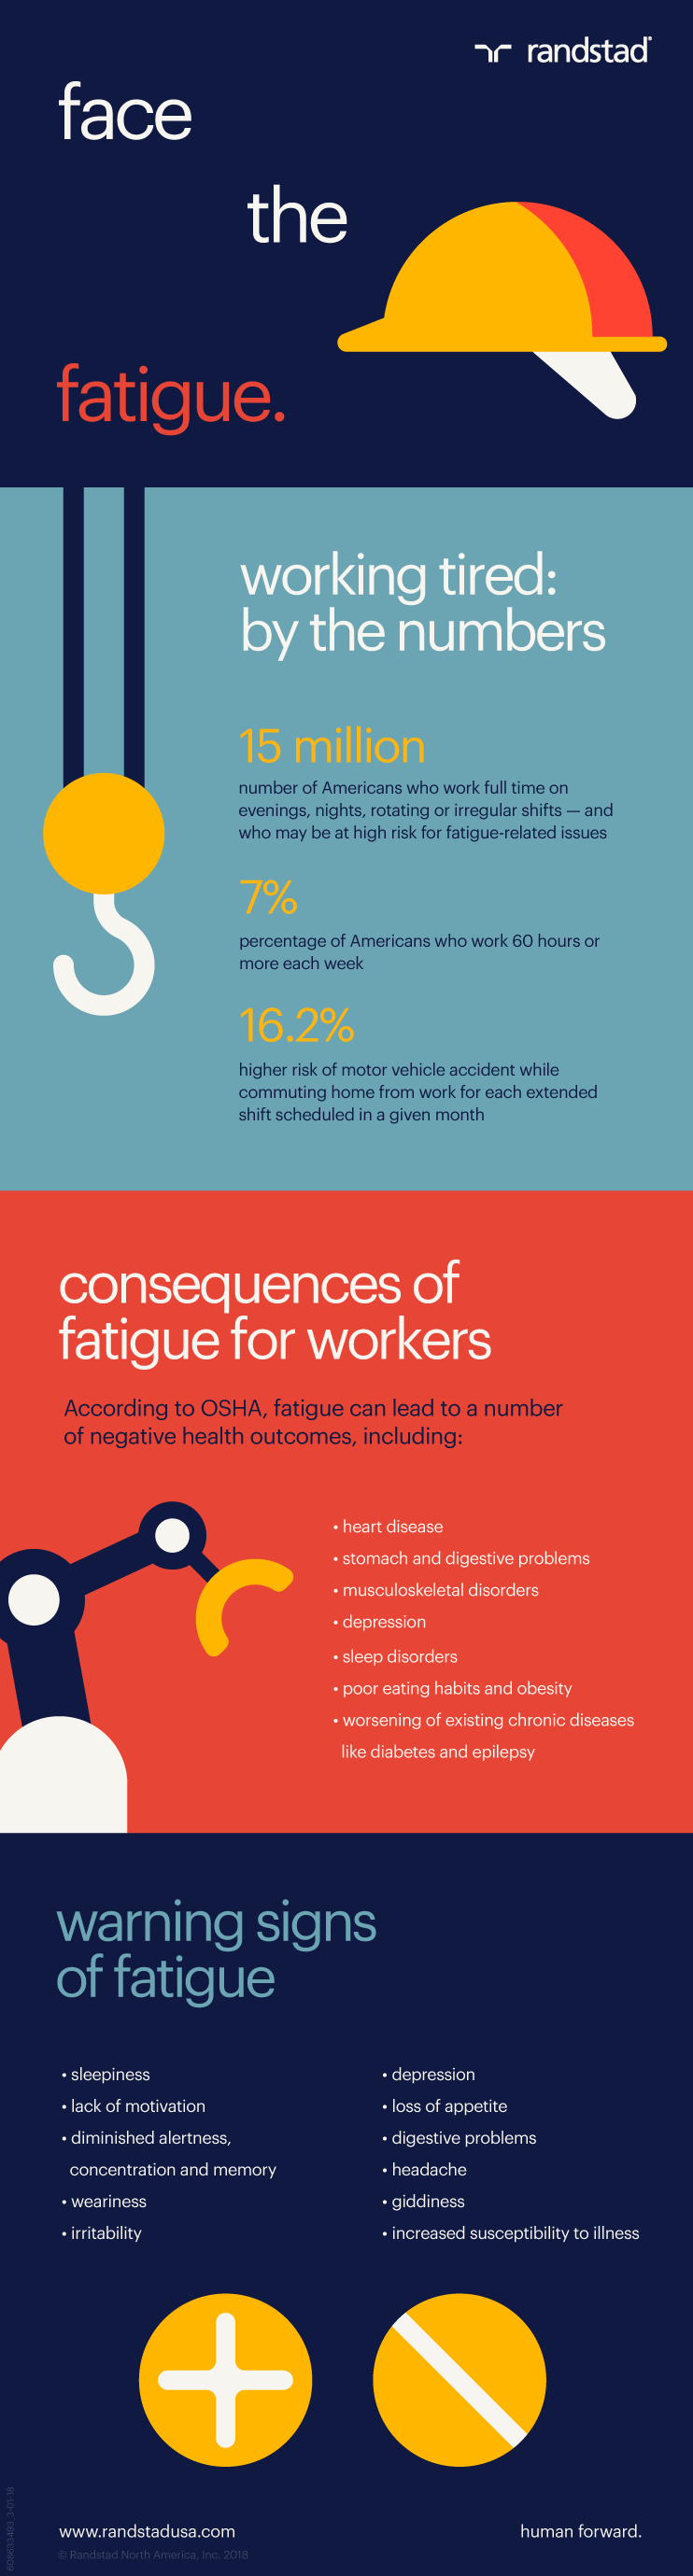 face the fatigue infographic